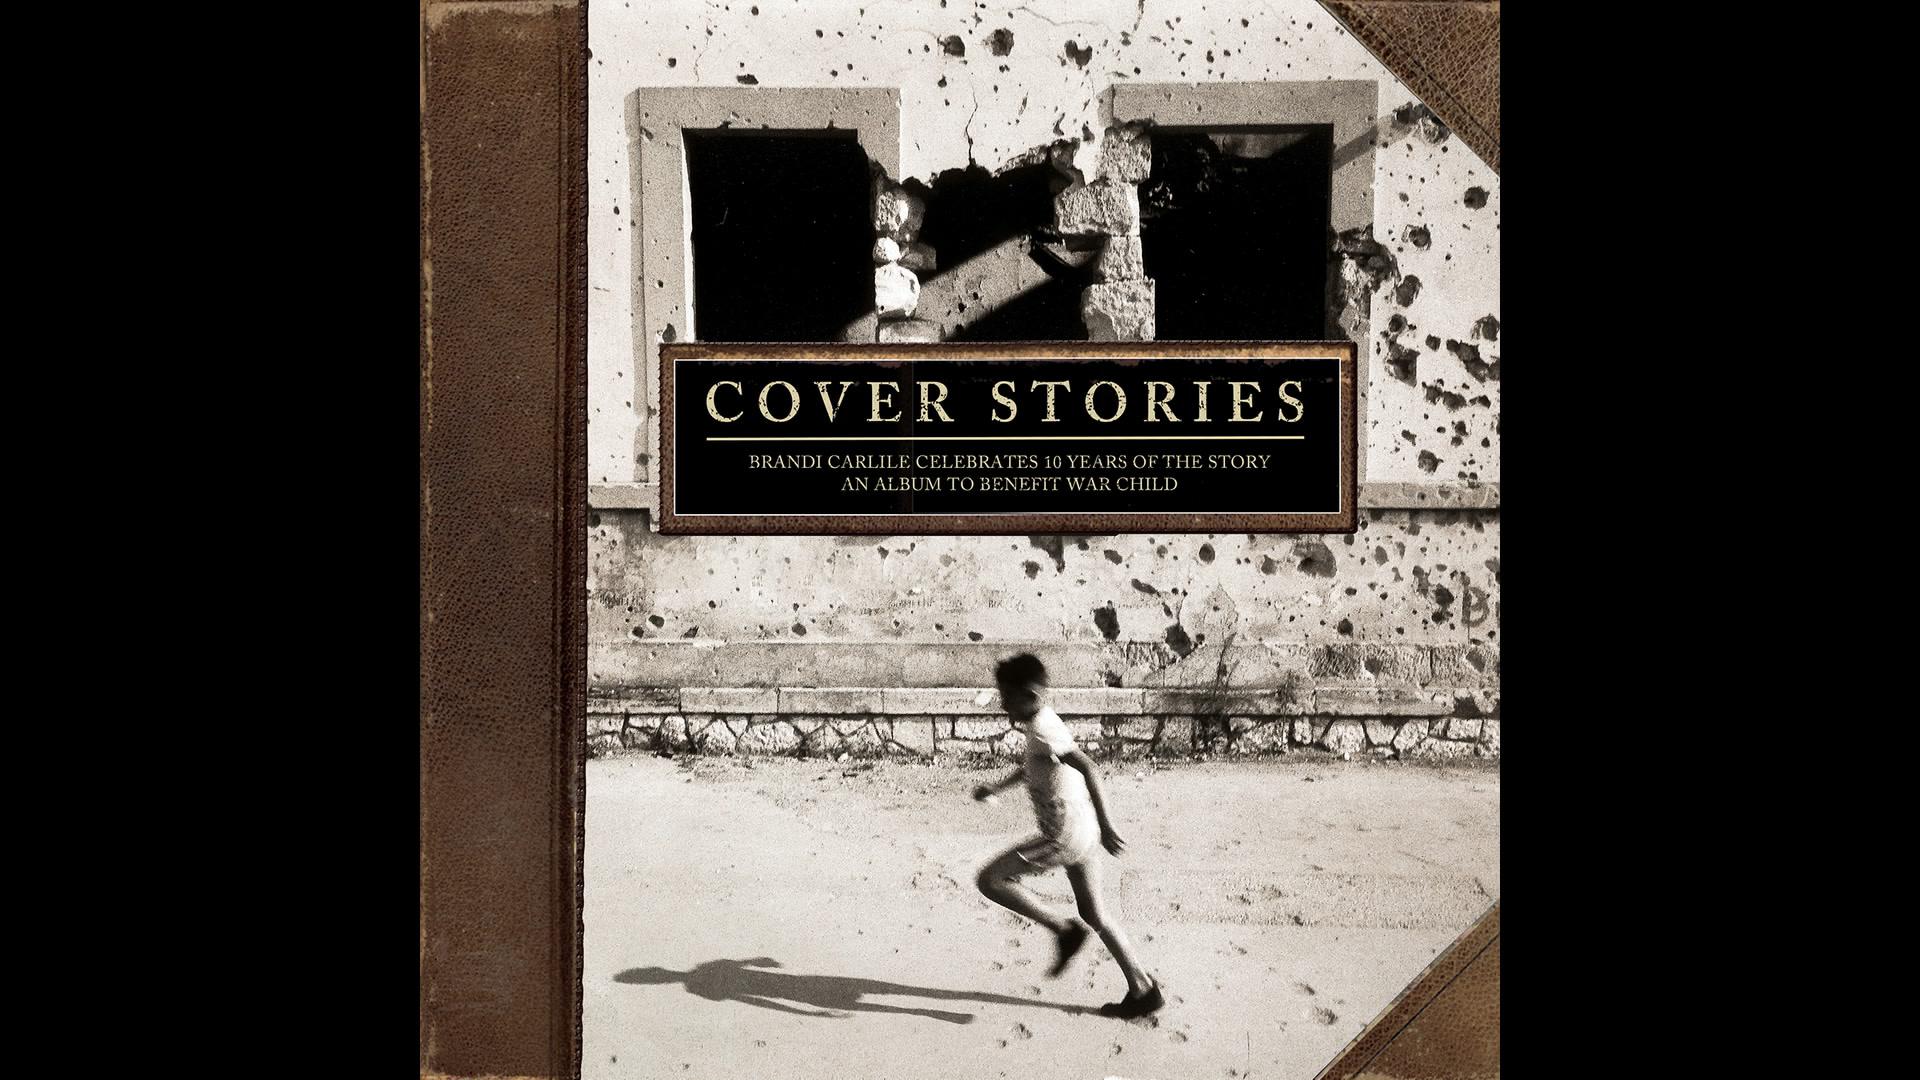 Old Crow Medicine Show - My Song (From Cover Stories: Brandi Carlile Celebrates The Story) (Audio)